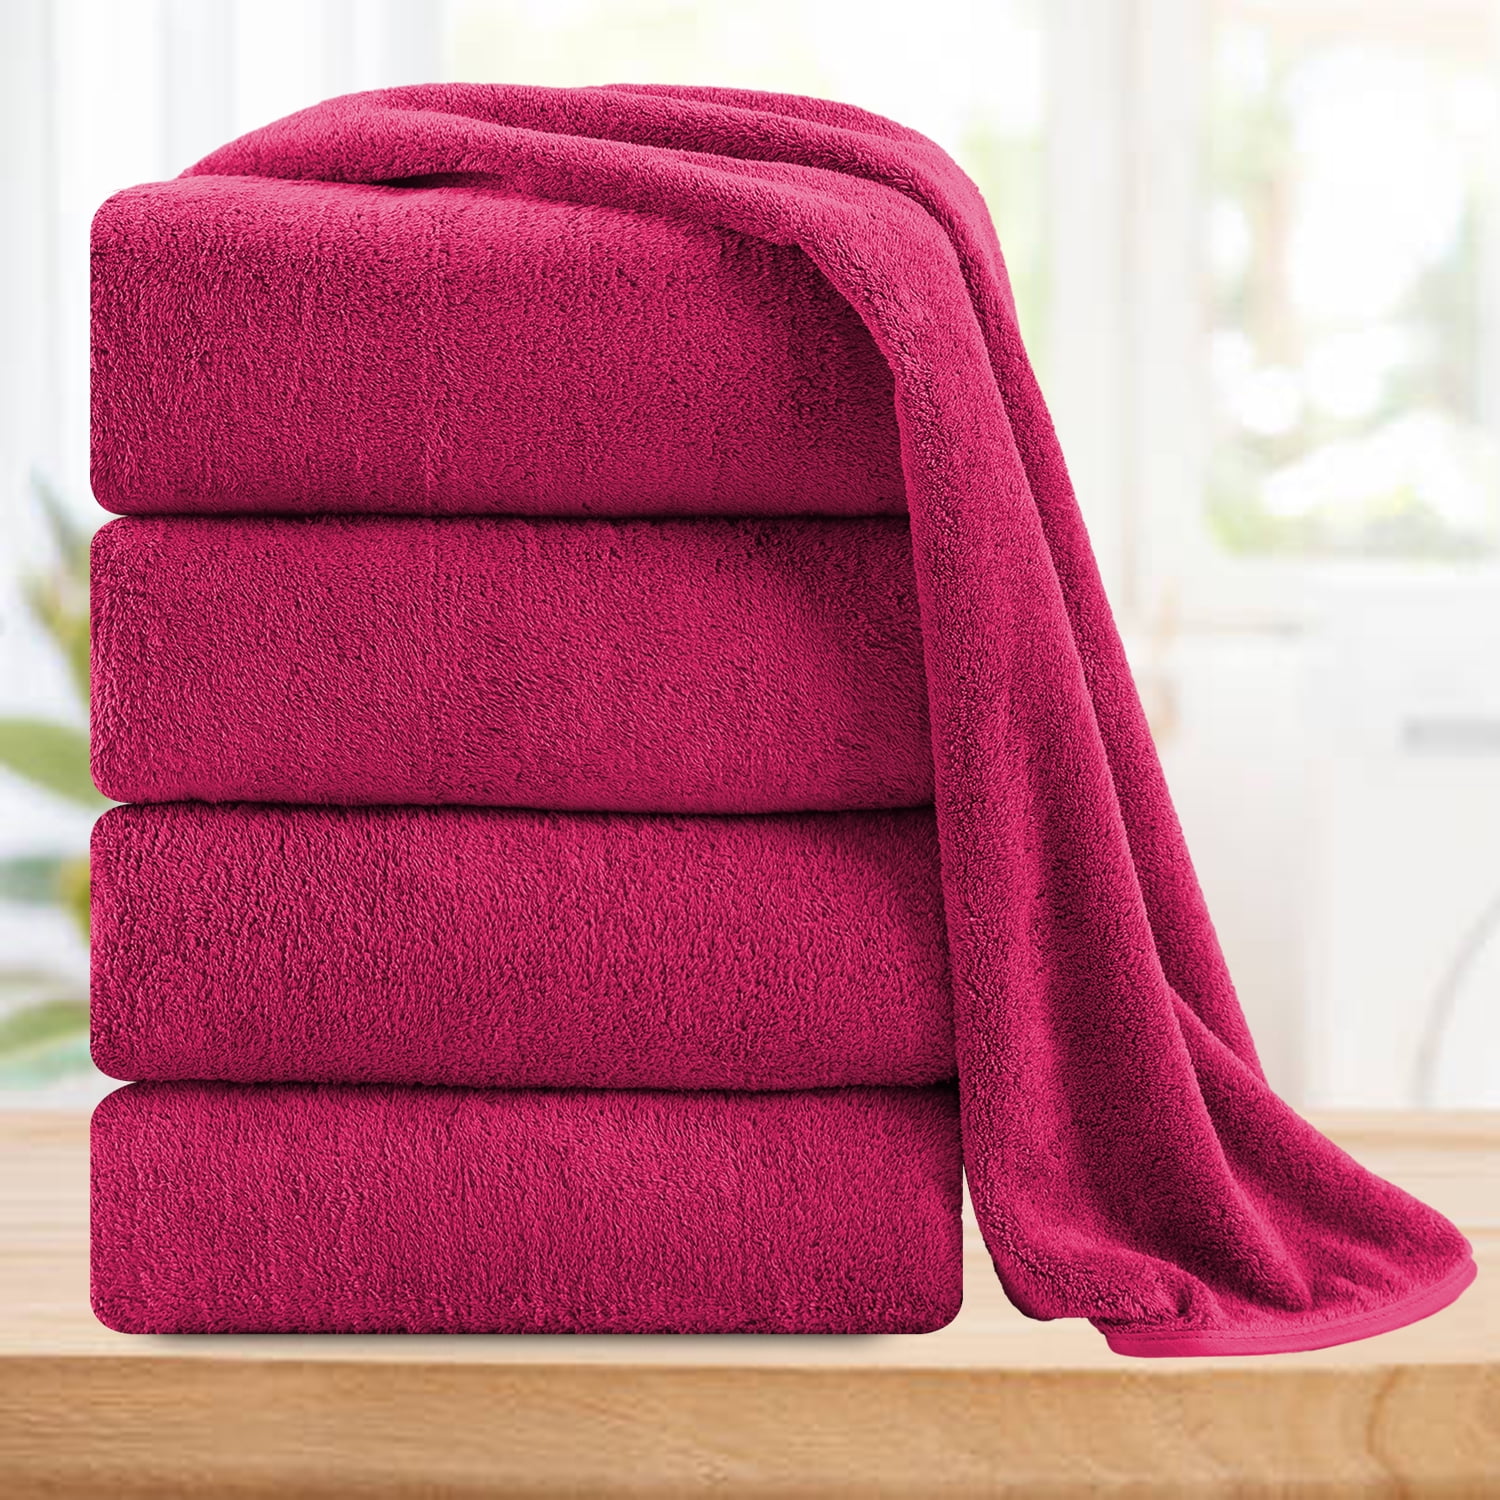 MoNiBloom Set of 2 Luxury Oversized Bath Sheet Towels, 35 x 70 in, 100%  Cotton Extra Large Bath Towels for Bathroom, Super Soft & High Absorbent,  Red 